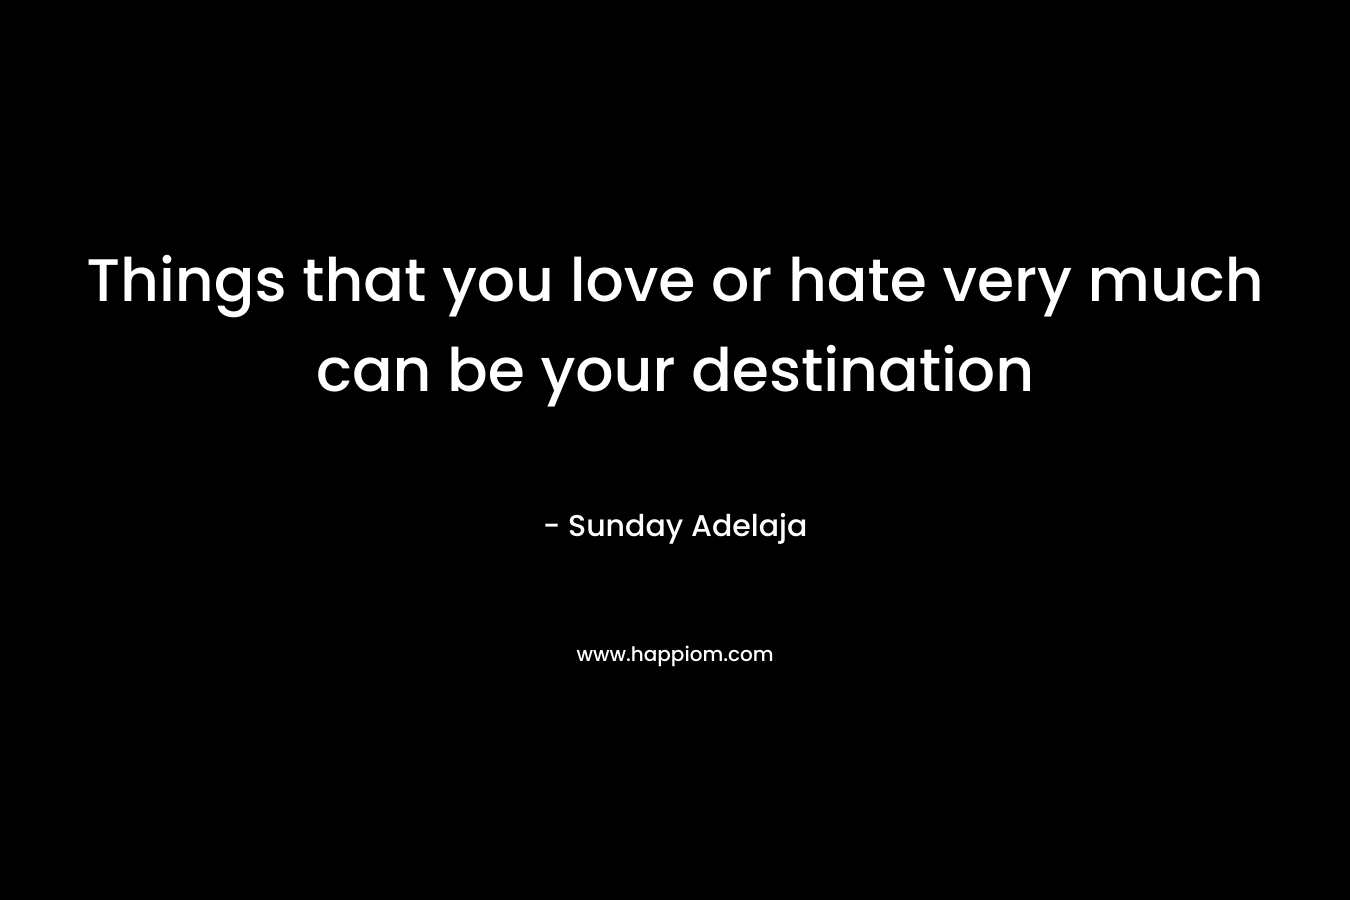 Things that you love or hate very much can be your destination